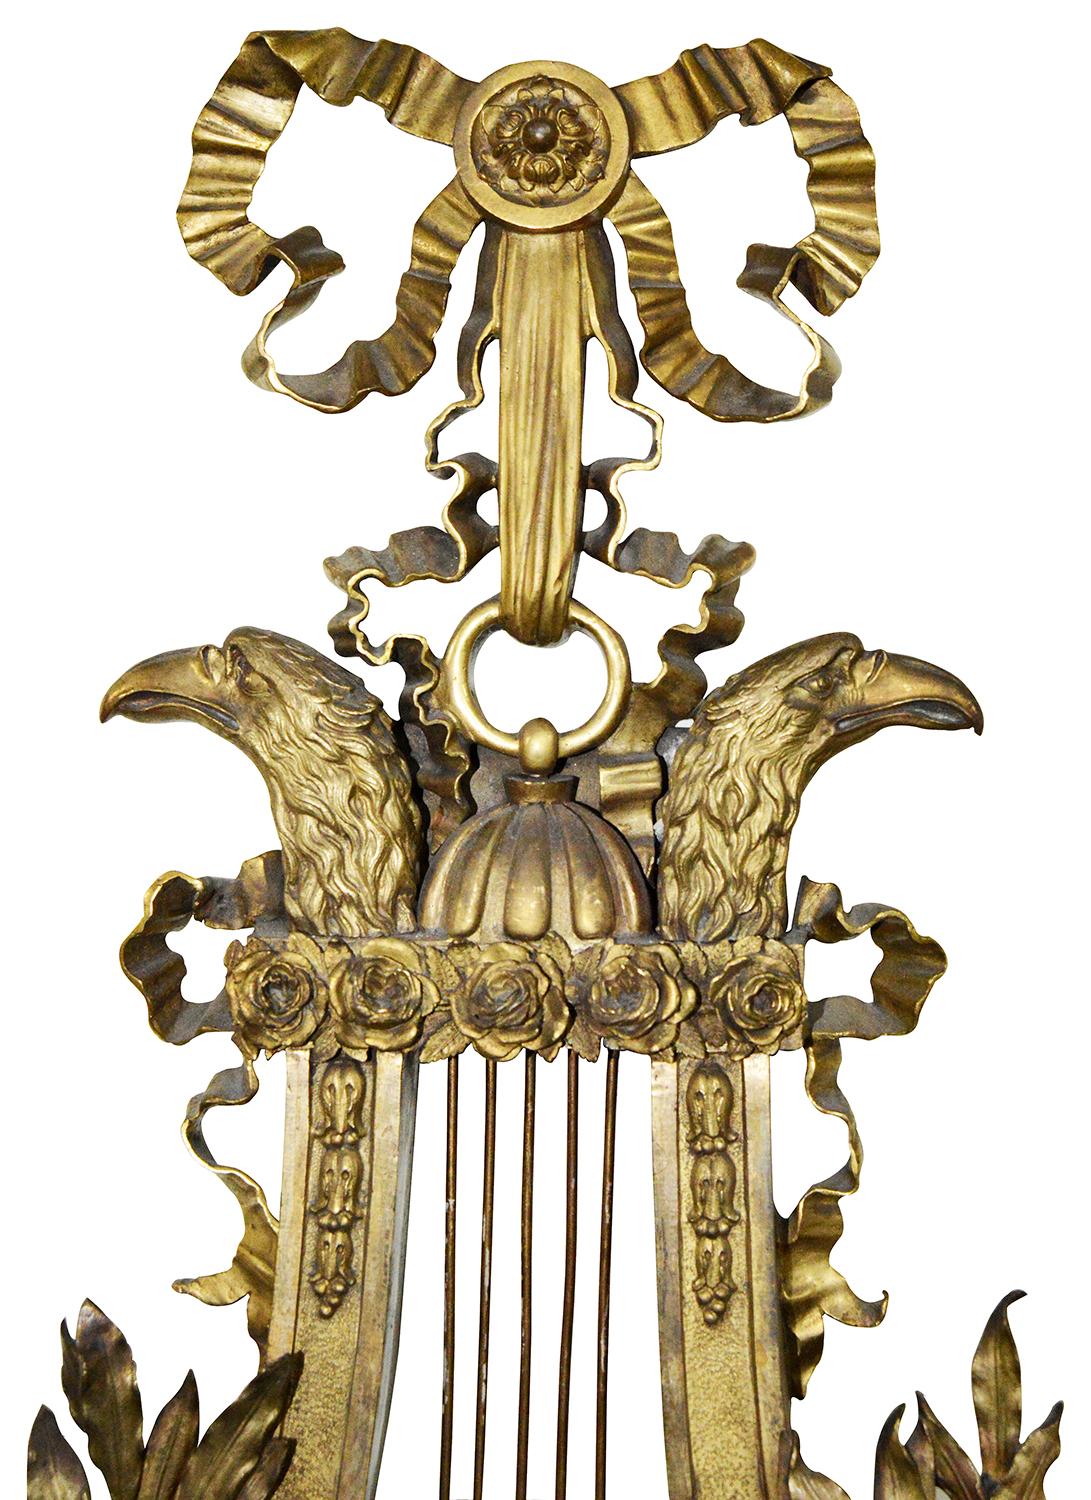 A wonderful, classical Empire influenced 19th century gilded ormolu Cartel wall clock, having ribbon and scrolling foliate decoration. The white enamel clock face set in a Lyre with a pair of stylised Eagles heads. The clock strike on the hour and